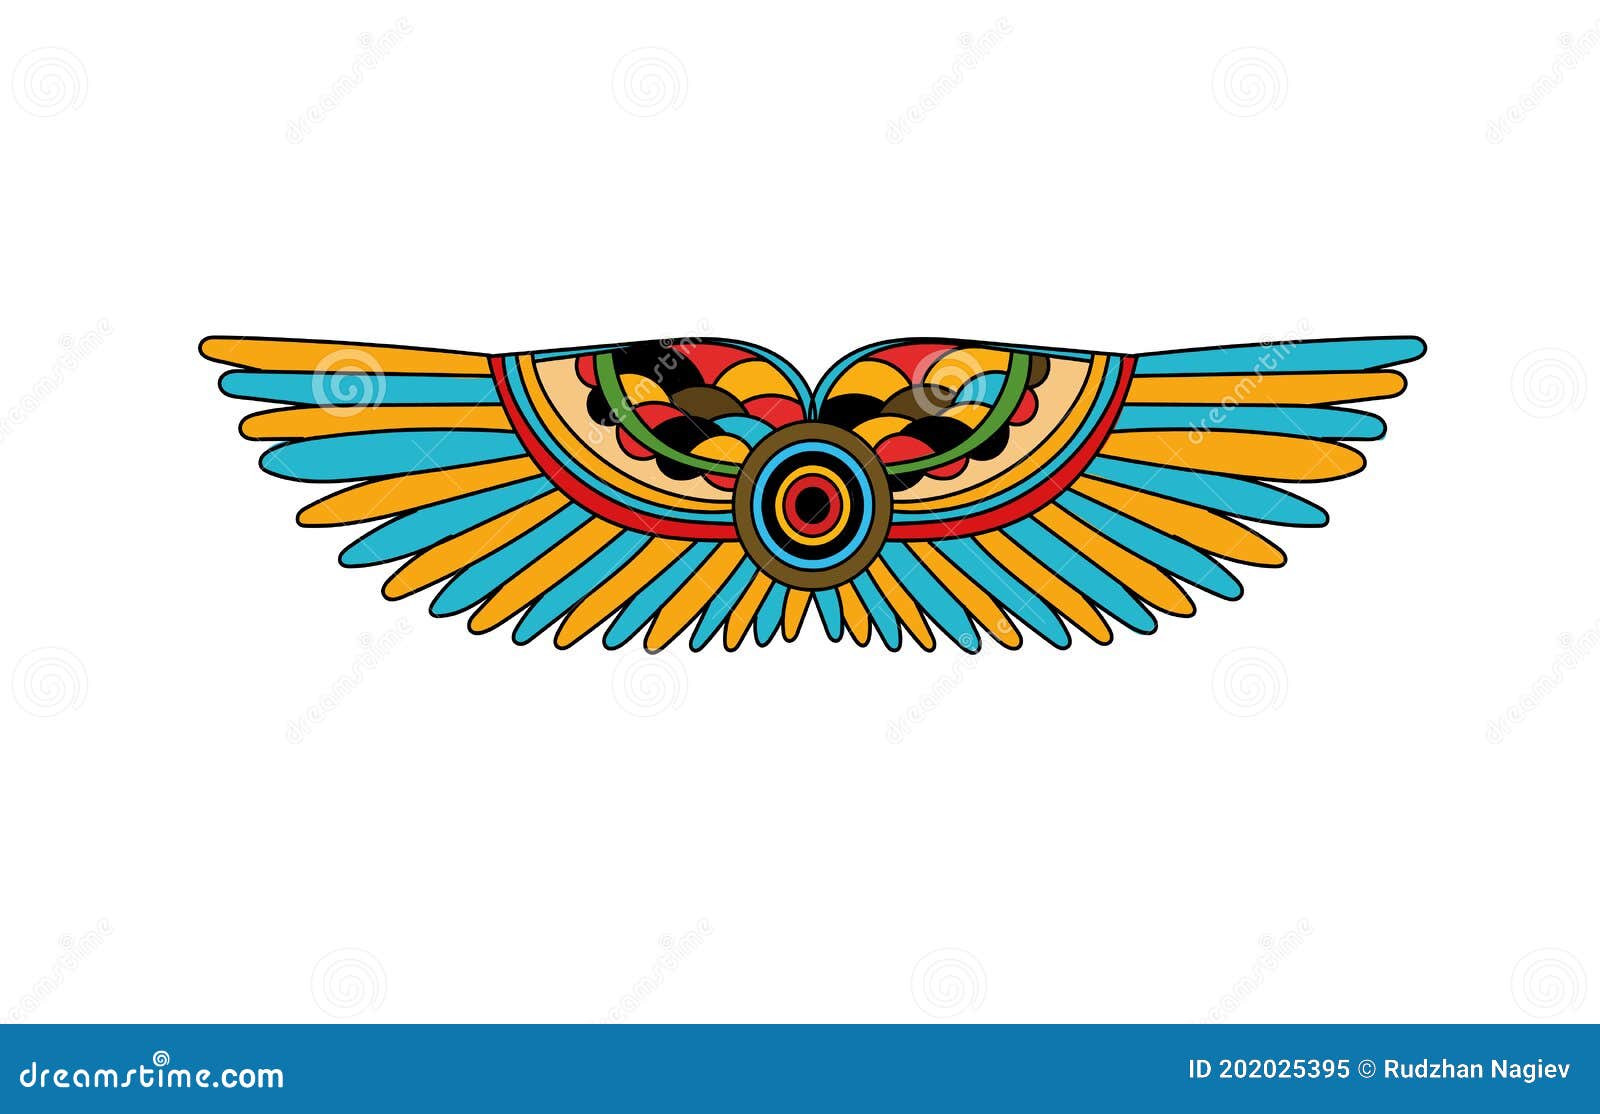 Winged sun with cobras symbol of ancient egypt Vector Image